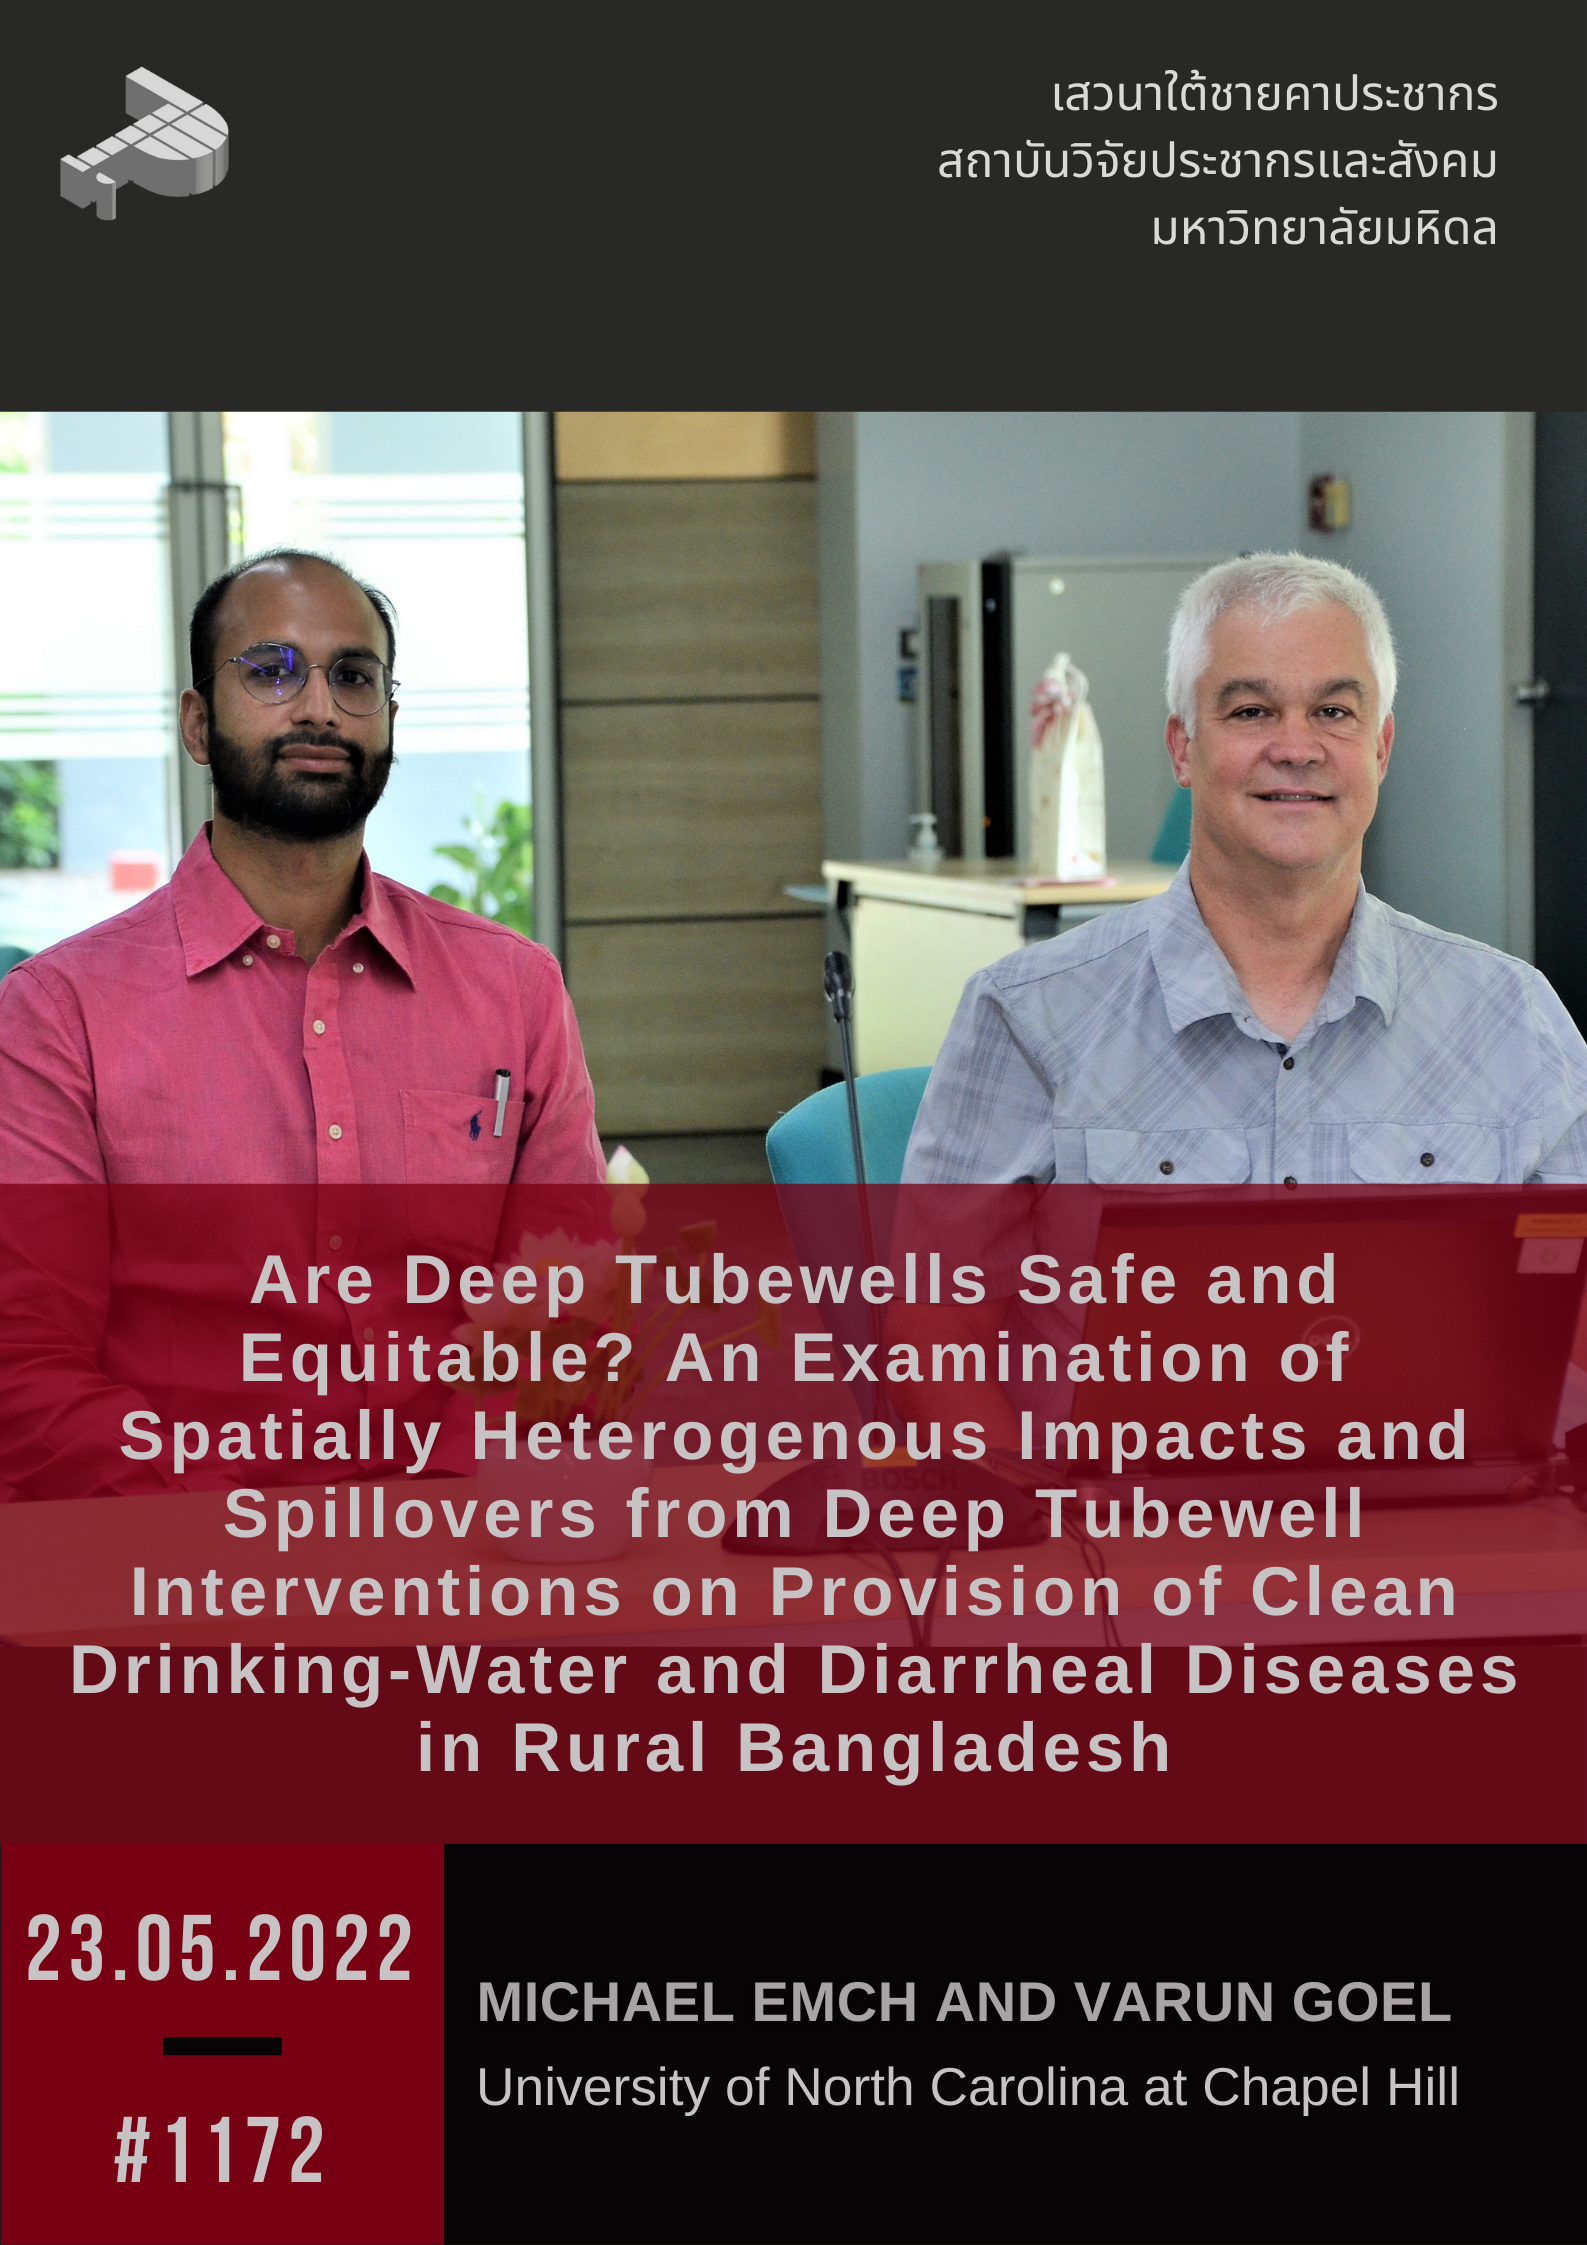 Are Deep Tubewells Safe and Equitable? An Examination of Spatially Heterogenous Impacts and Spillovers from Deep Tubewell Interventions on Provision of Clean Drinking-Water and Diarrheal Diseases in Rural Bangladesh